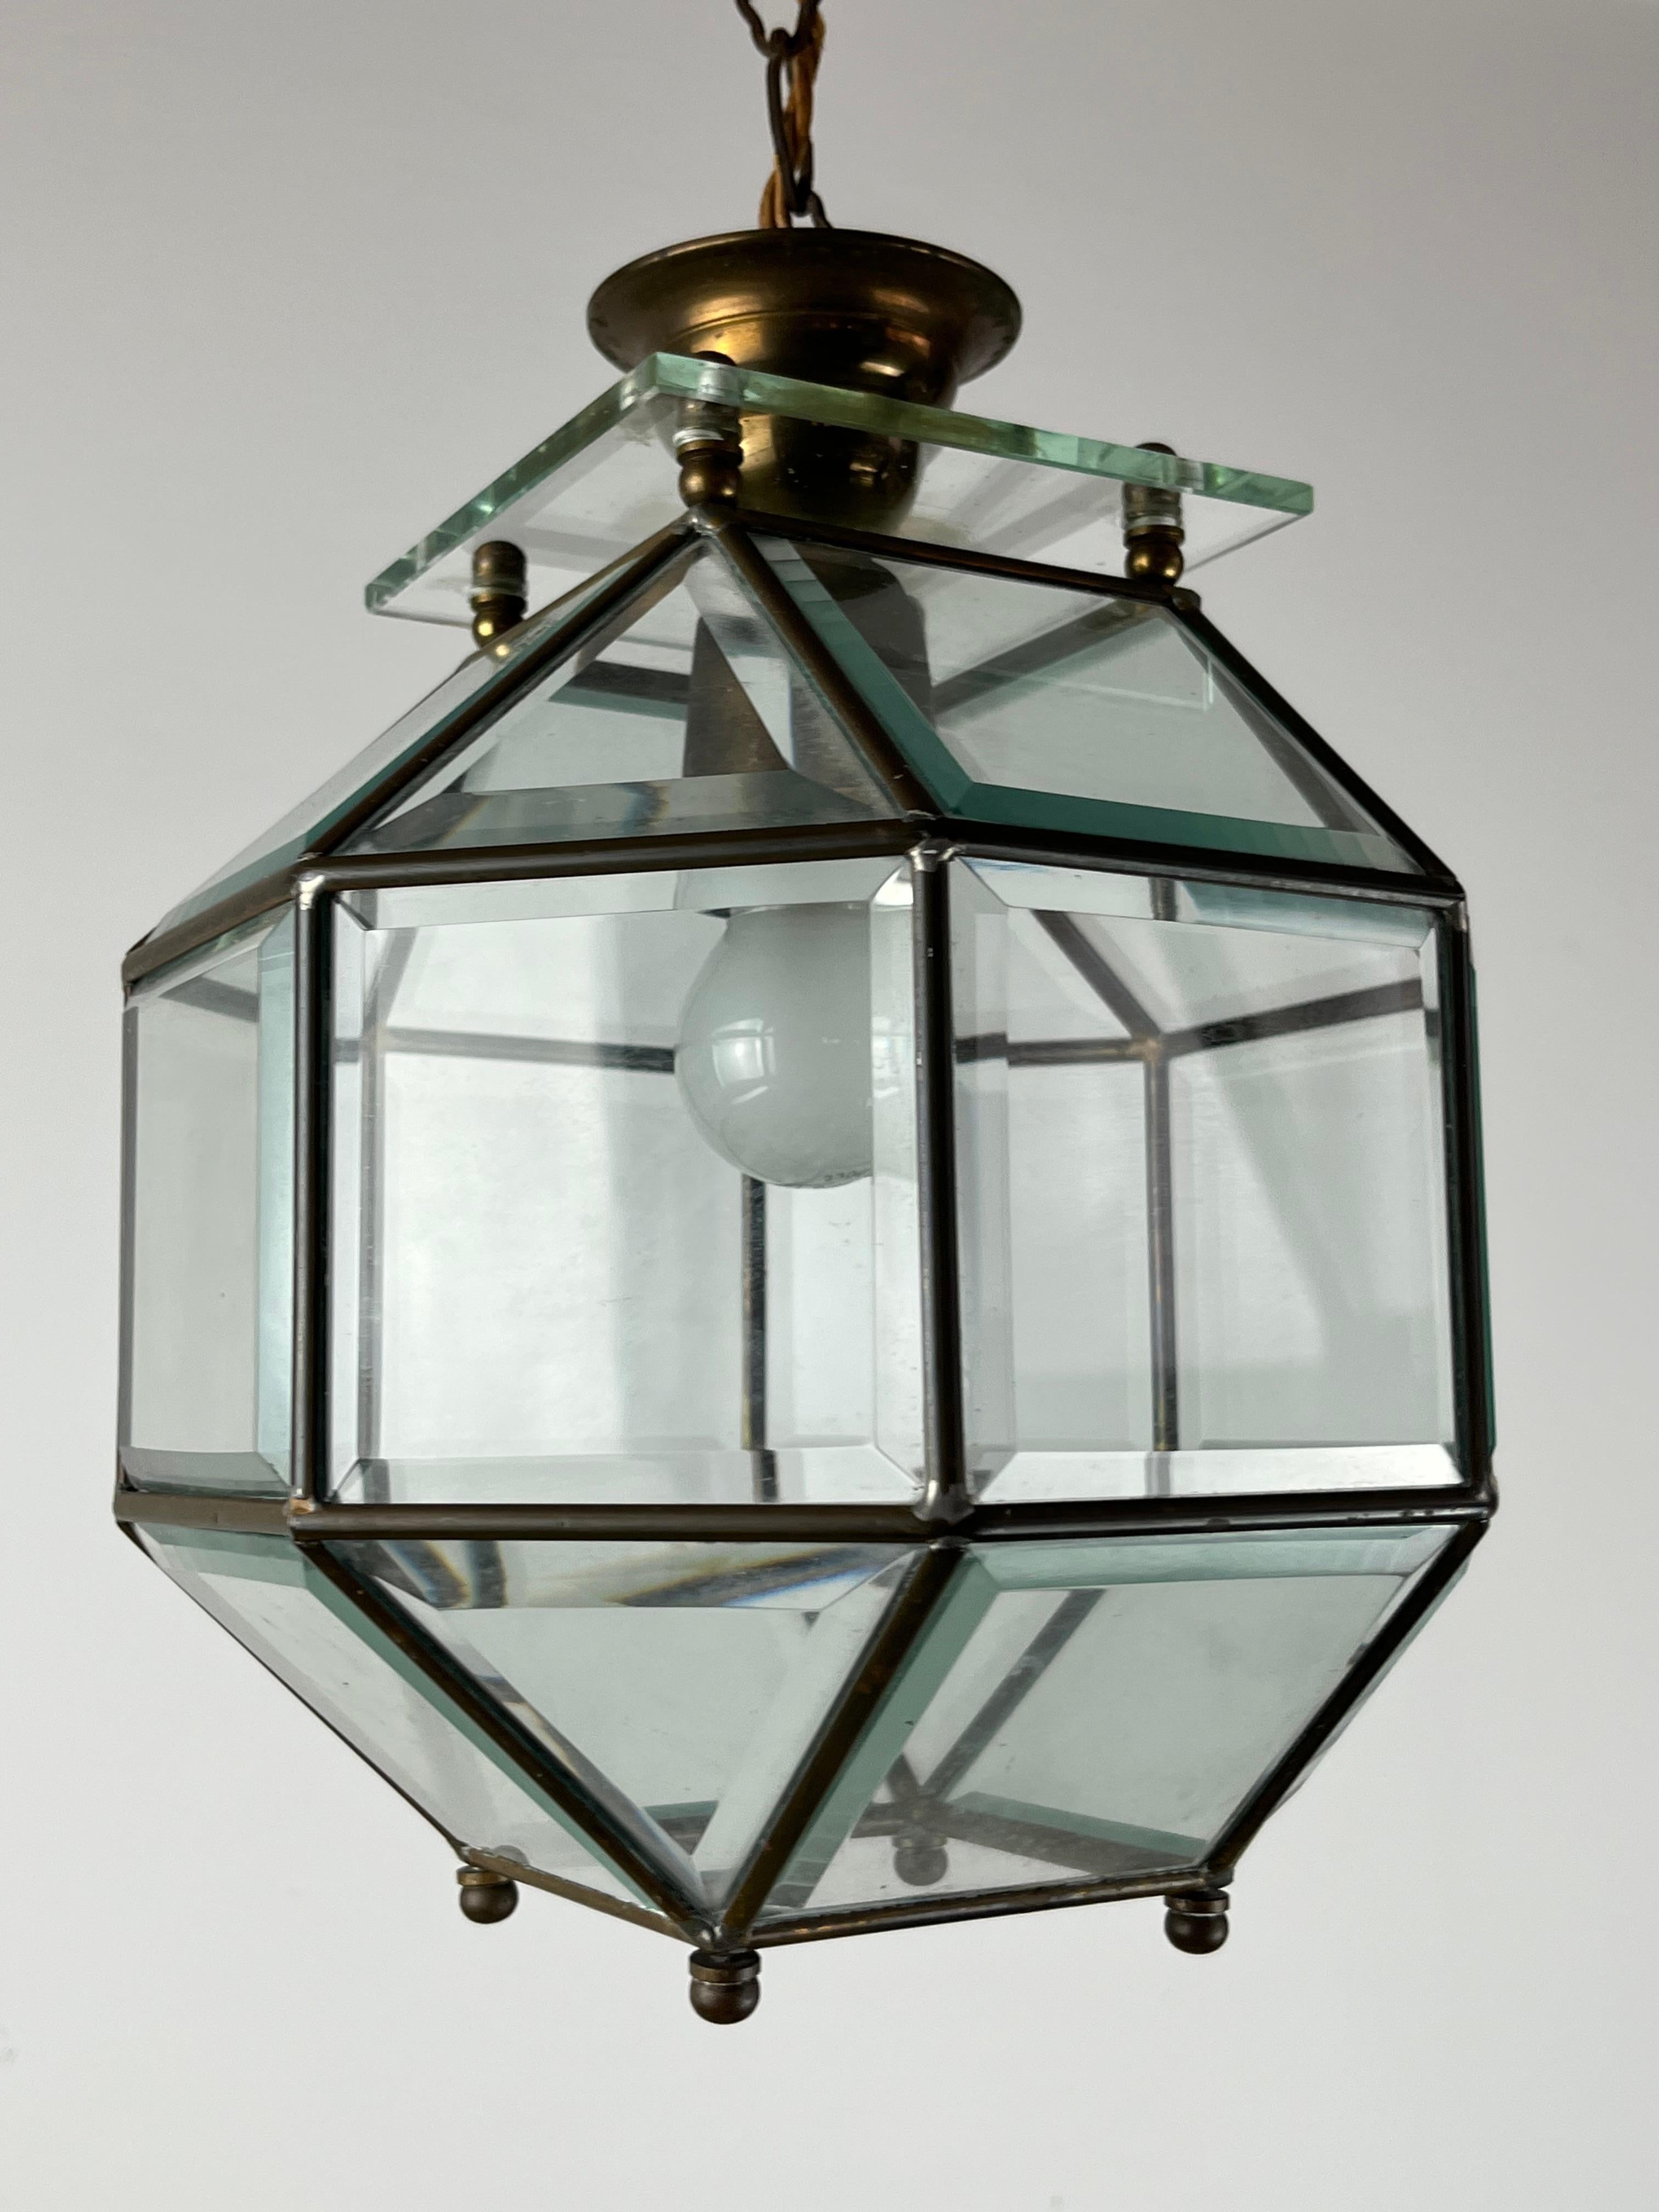 Murano Glass and Brass Lantern Chandelier Attributed to Fontana Arte, Italy. It dates back to the 1950s. Good condition, small signs of aging. Glasses intact and working. Length with chain 115 cm.